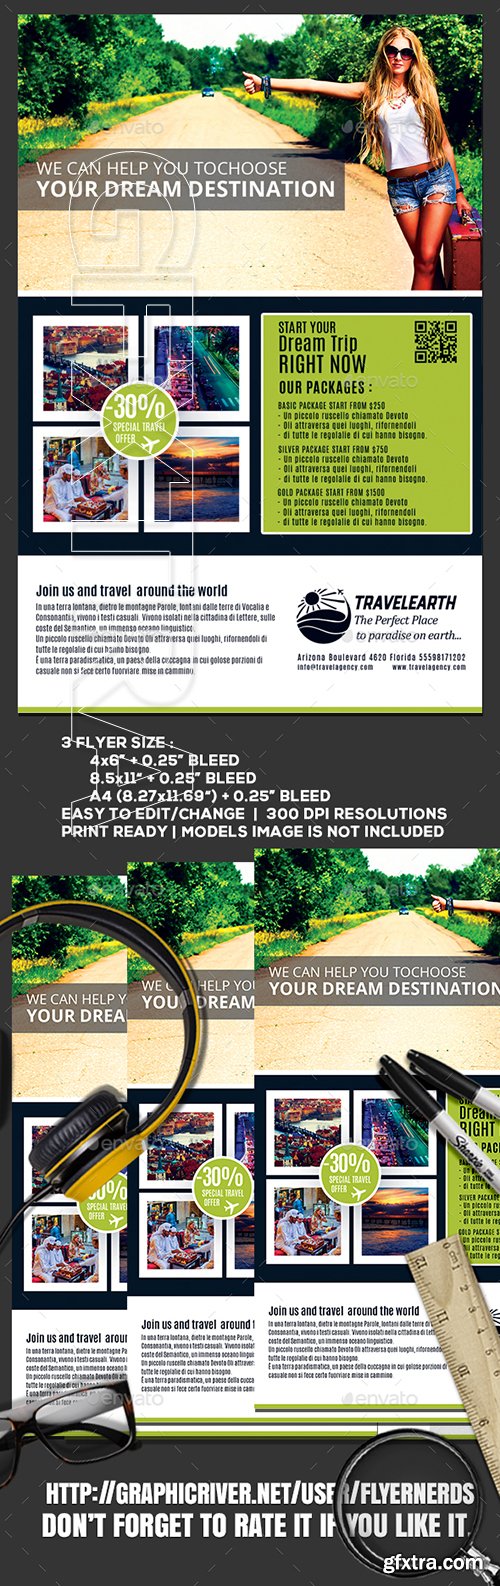 GraphicRiver - Travel Agency Flyer 22655363